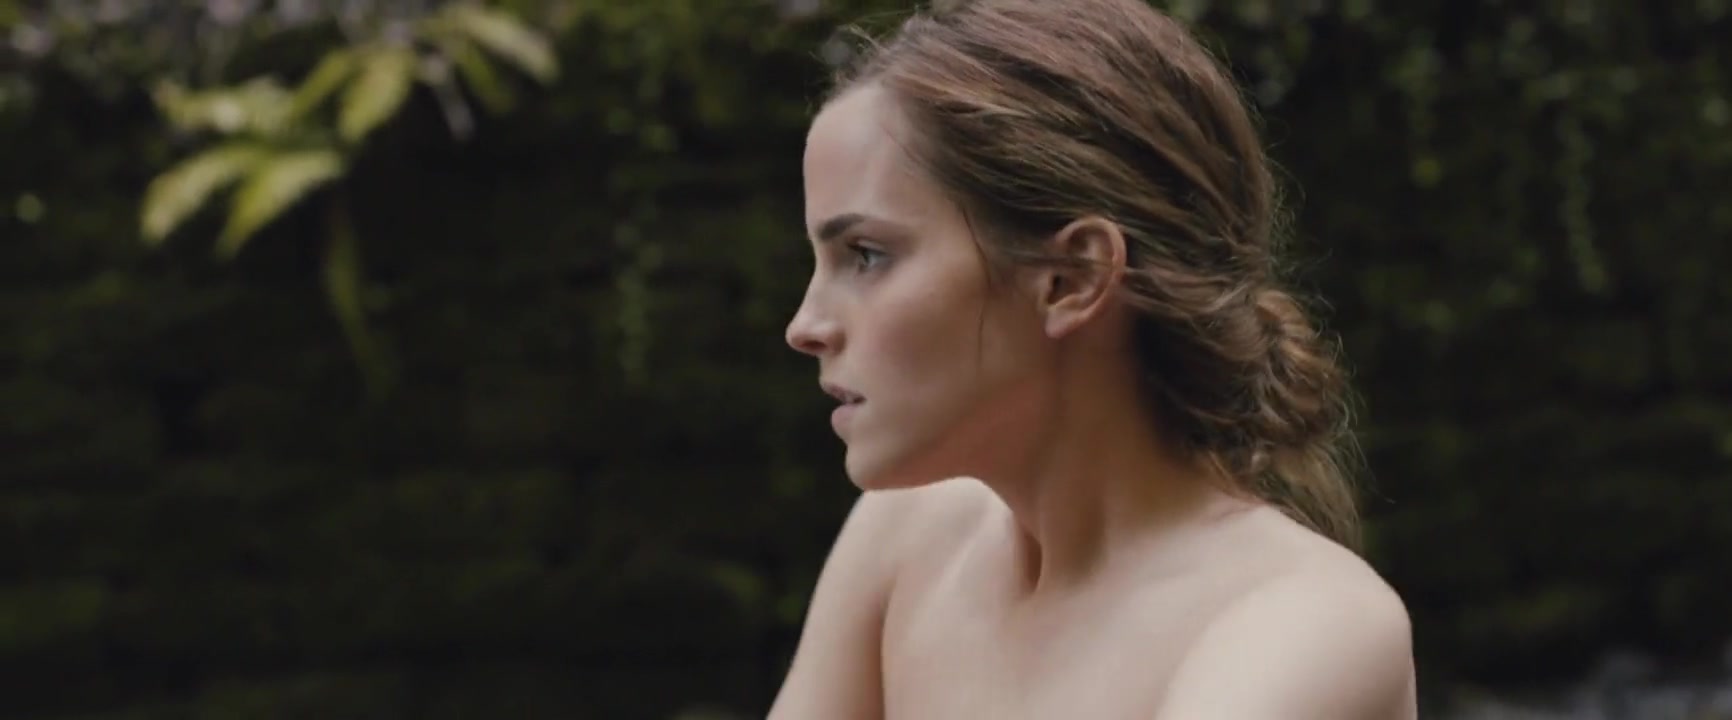 Emma Watson completely topless boobs in magazine - Celebrity nude